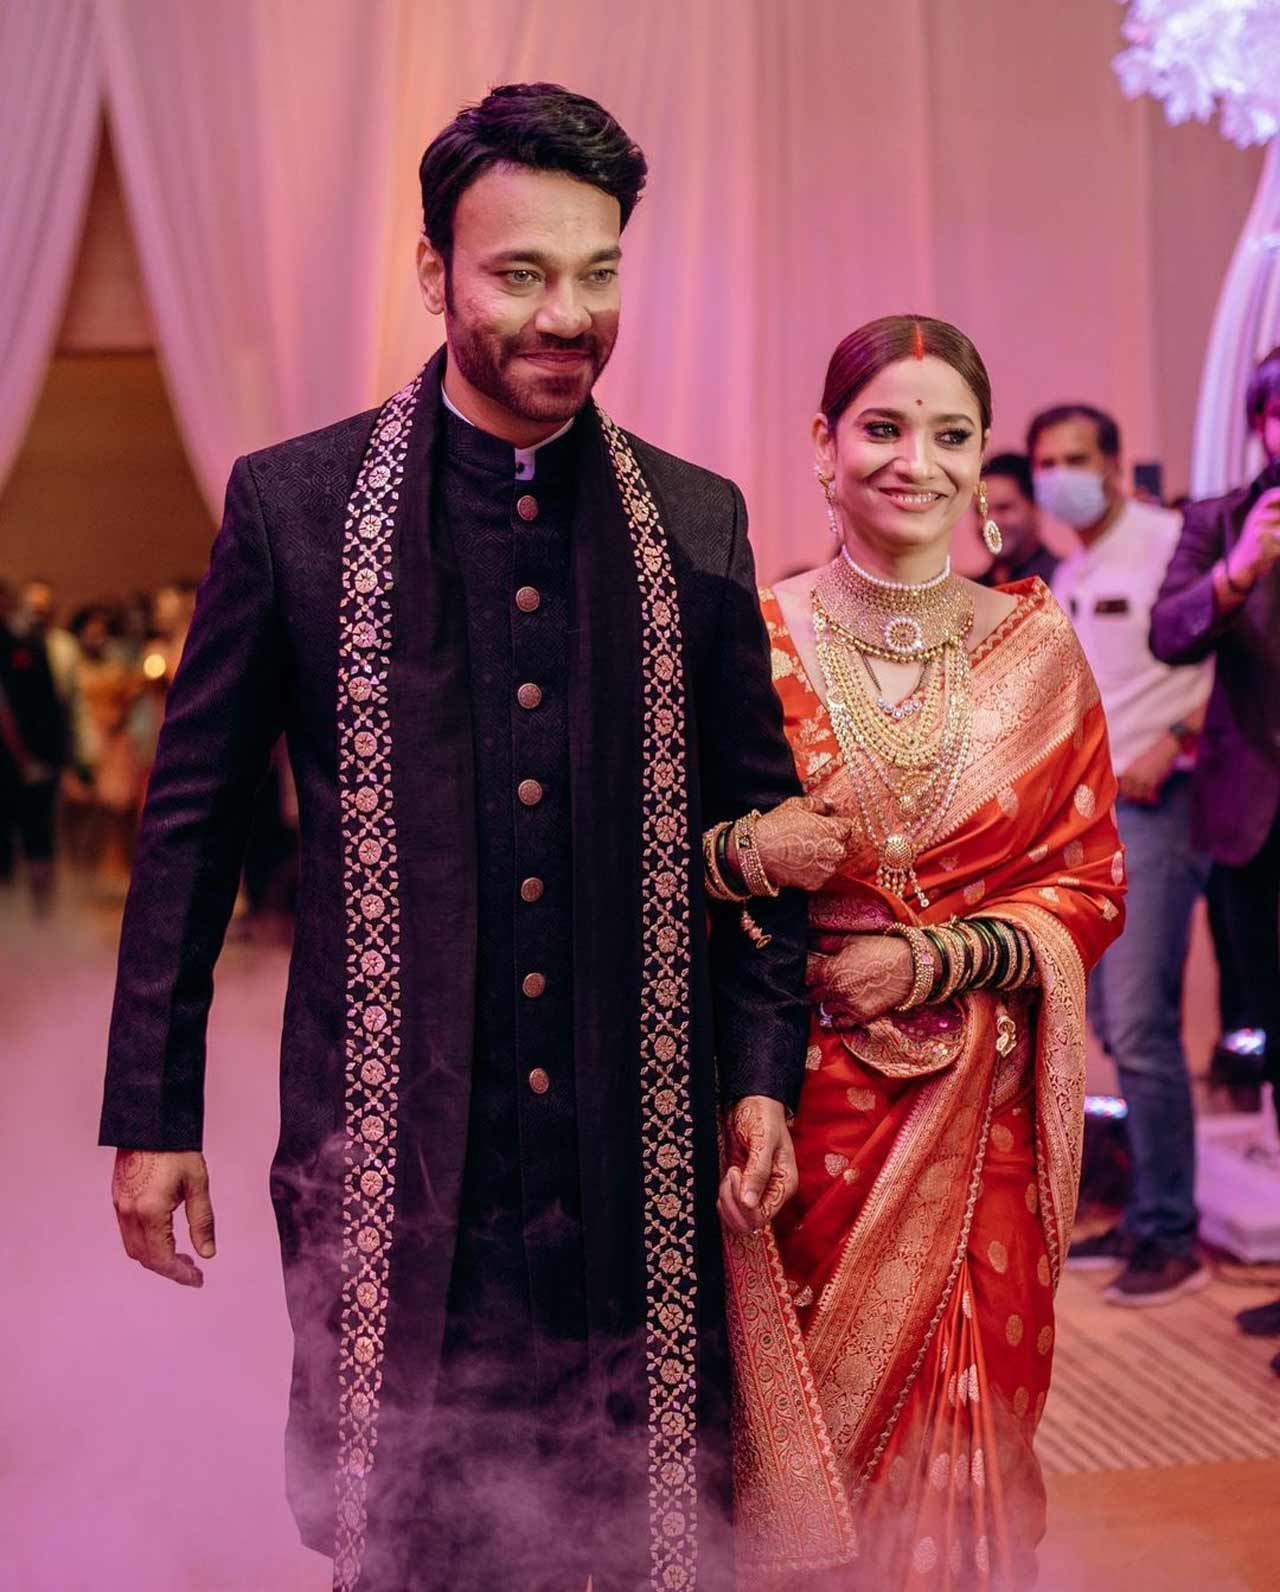 Before she could give us all a glimpse of her d-day, the pictures and videos from Ankita Lokhande and Vicky Jain's wedding ceremony had already taken over the internet.